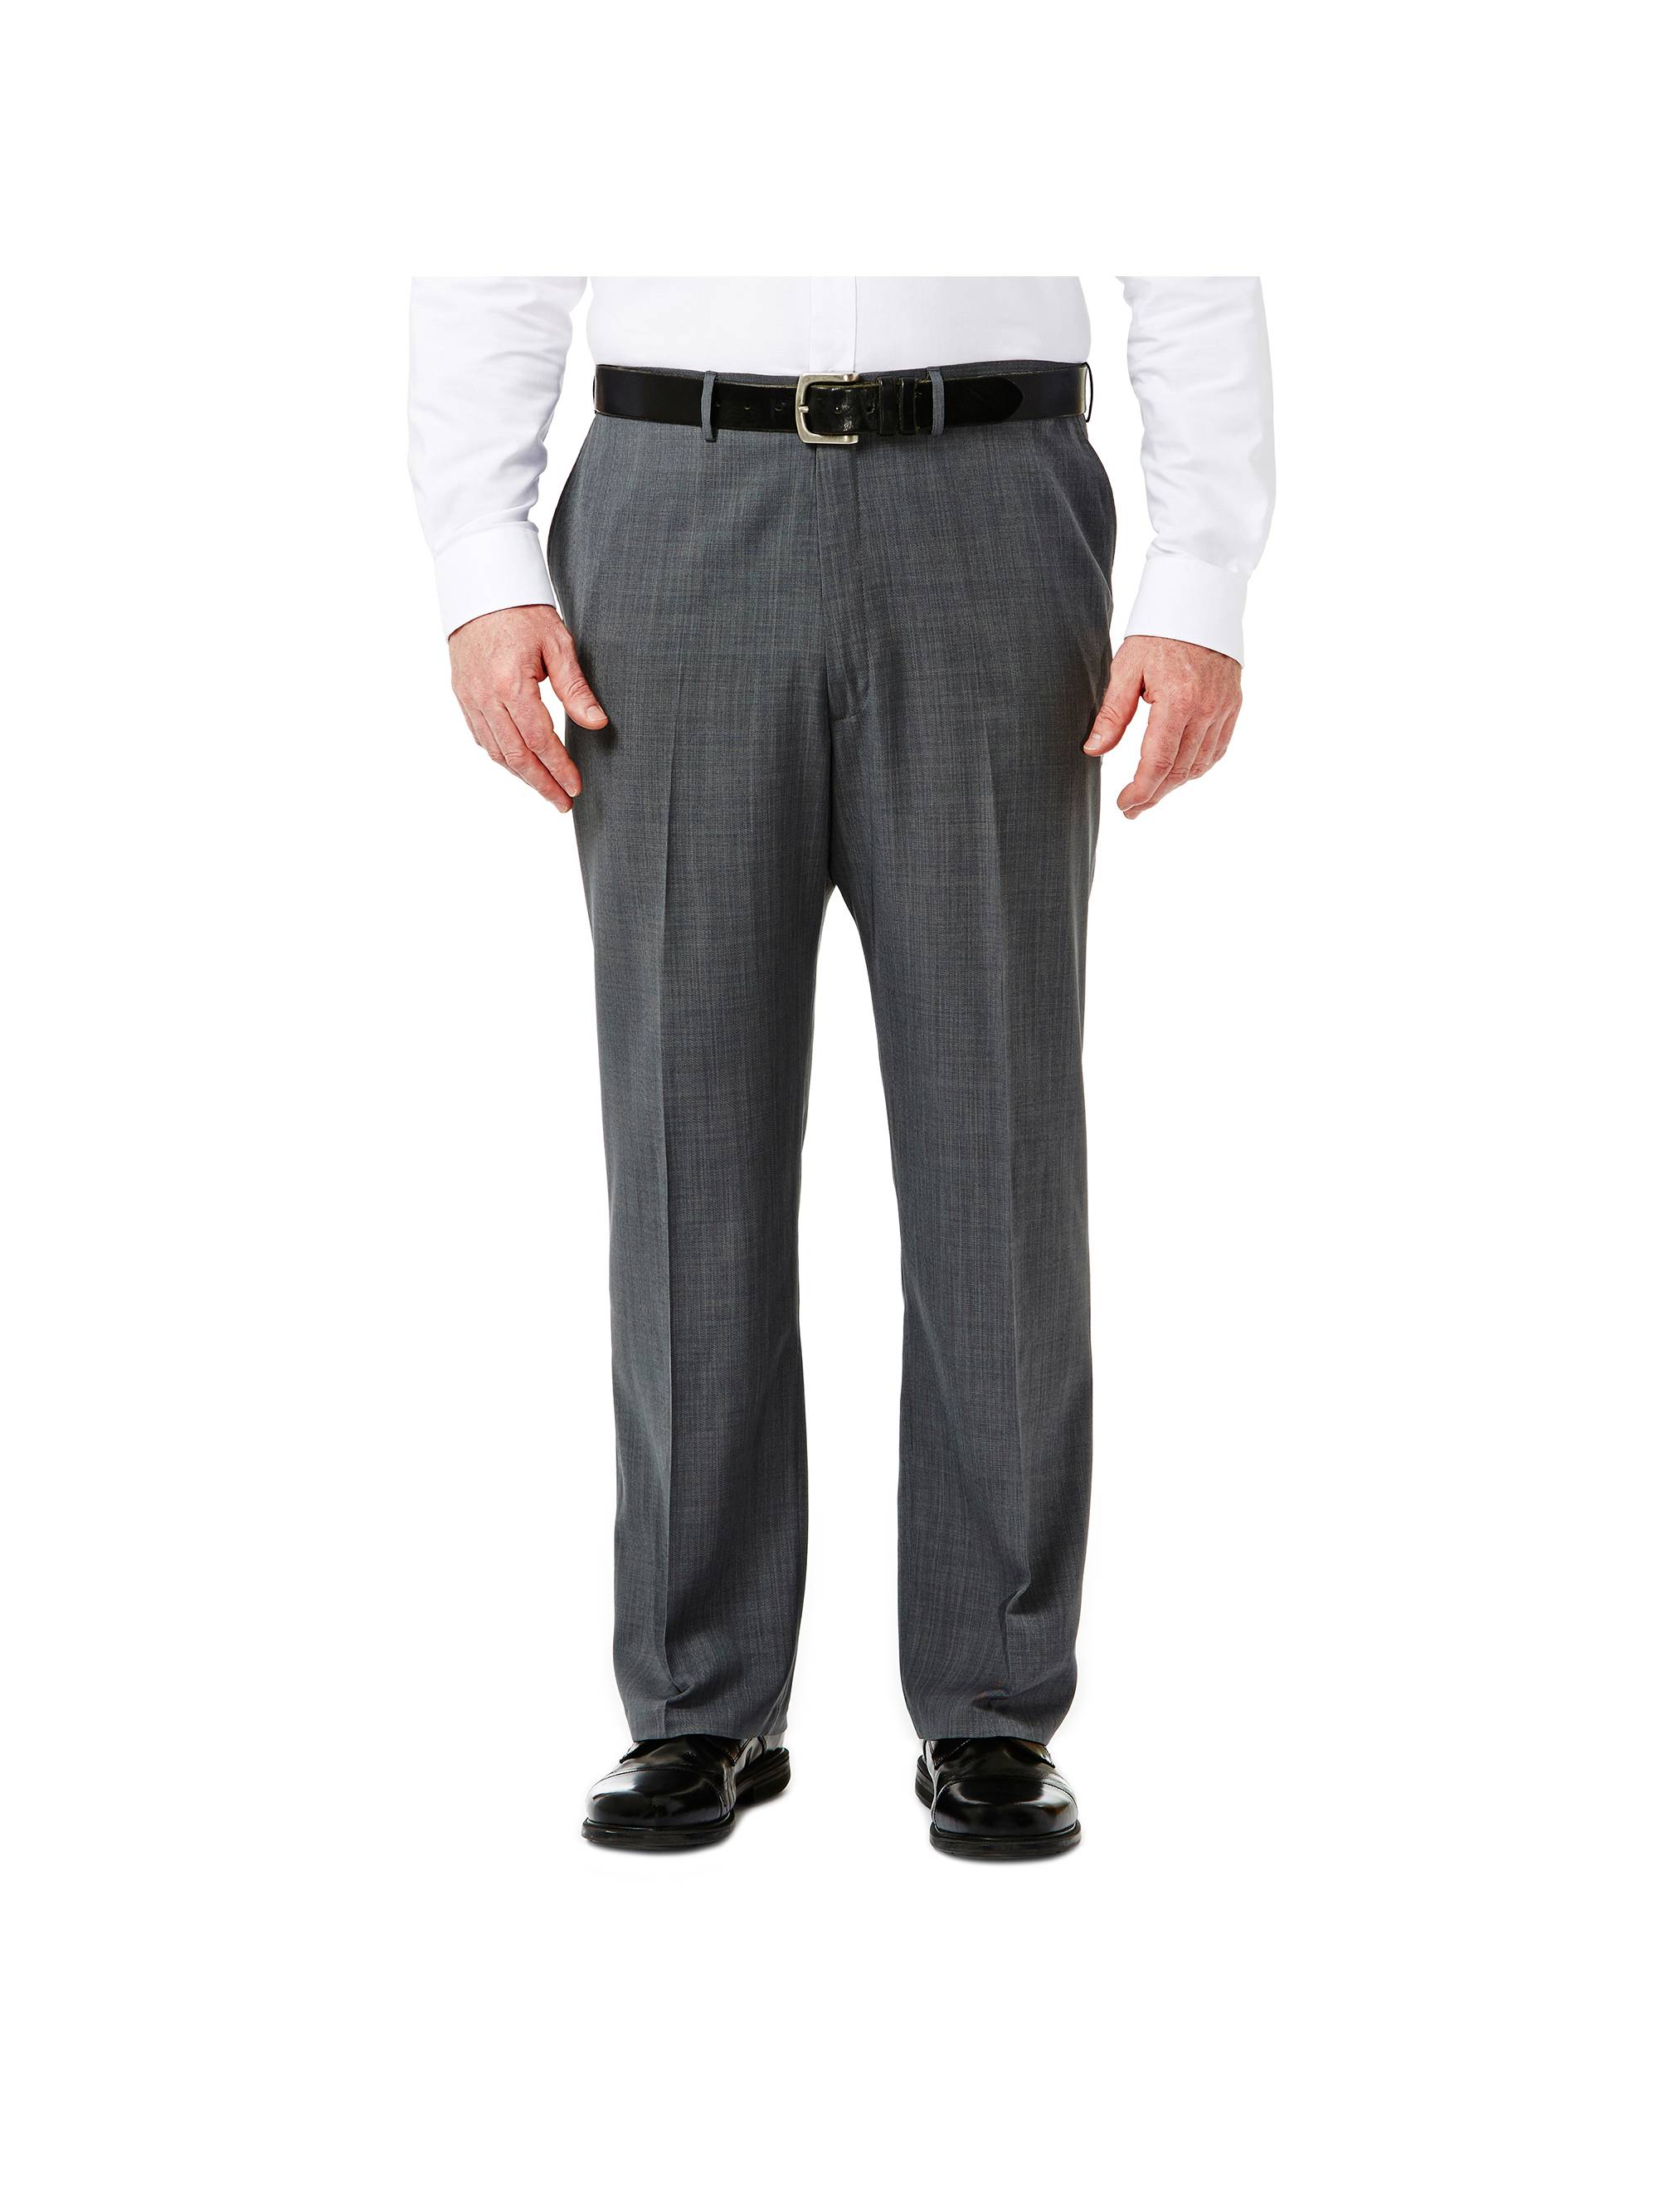 Haggar Mens Big & Tall Striped Plain-Front Suit-Separate Pant 